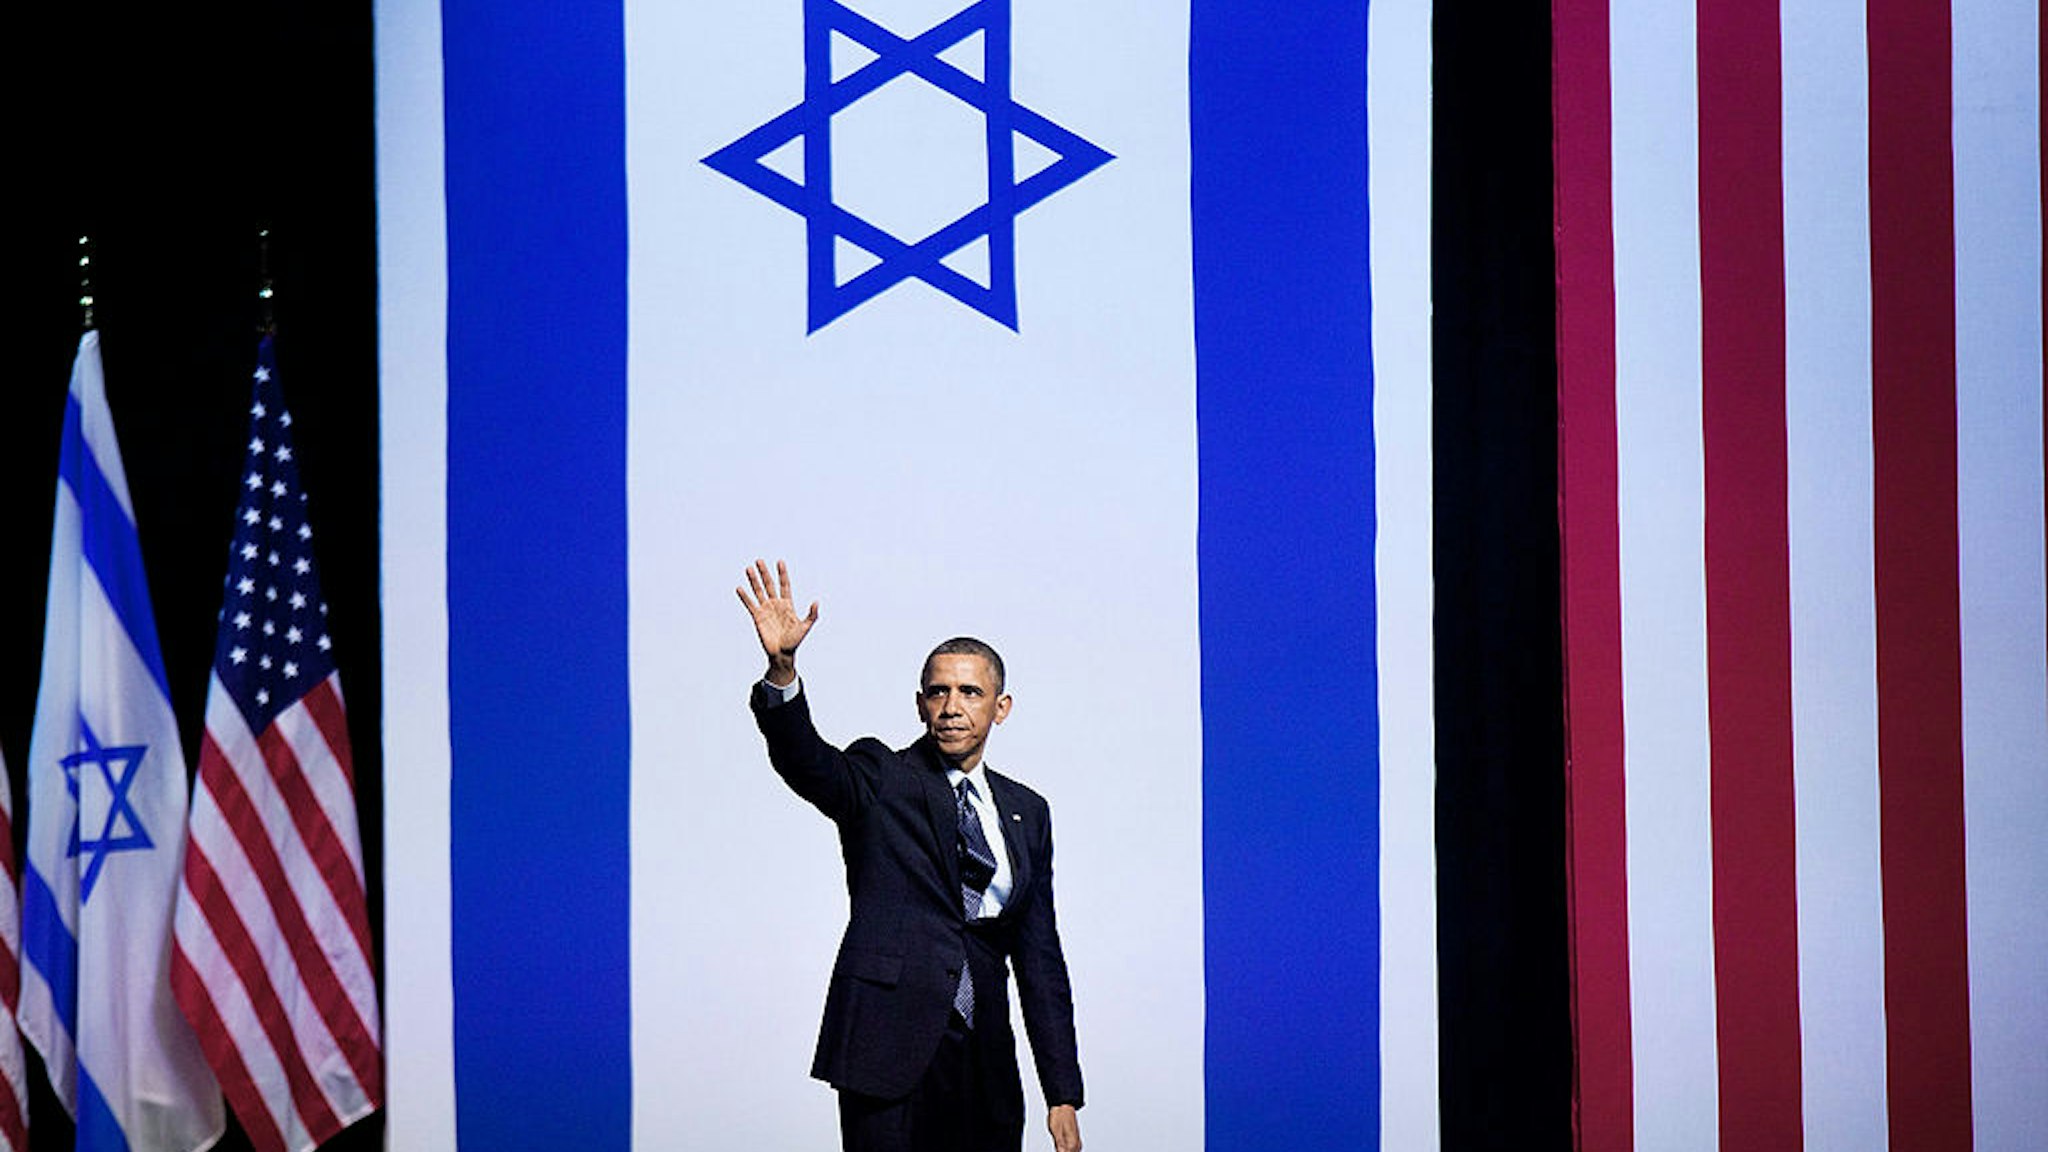 JERUSALEM, ISRAEL - MARCH 21: (ISRAEL OUT) U.S. President Barack Obama waves to the crowed at the end of his speech to Israeli students at the International Convention Center on March 21, 2013 in Jerusalem, Israel. This is Obama's first visit as president to the region and his itinerary includes meetings with the Palestinian and Israeli leaders as well as a visit to the Church of the Nativity in Bethlehem. (Photo by Uriel Sinai/Getty Images)